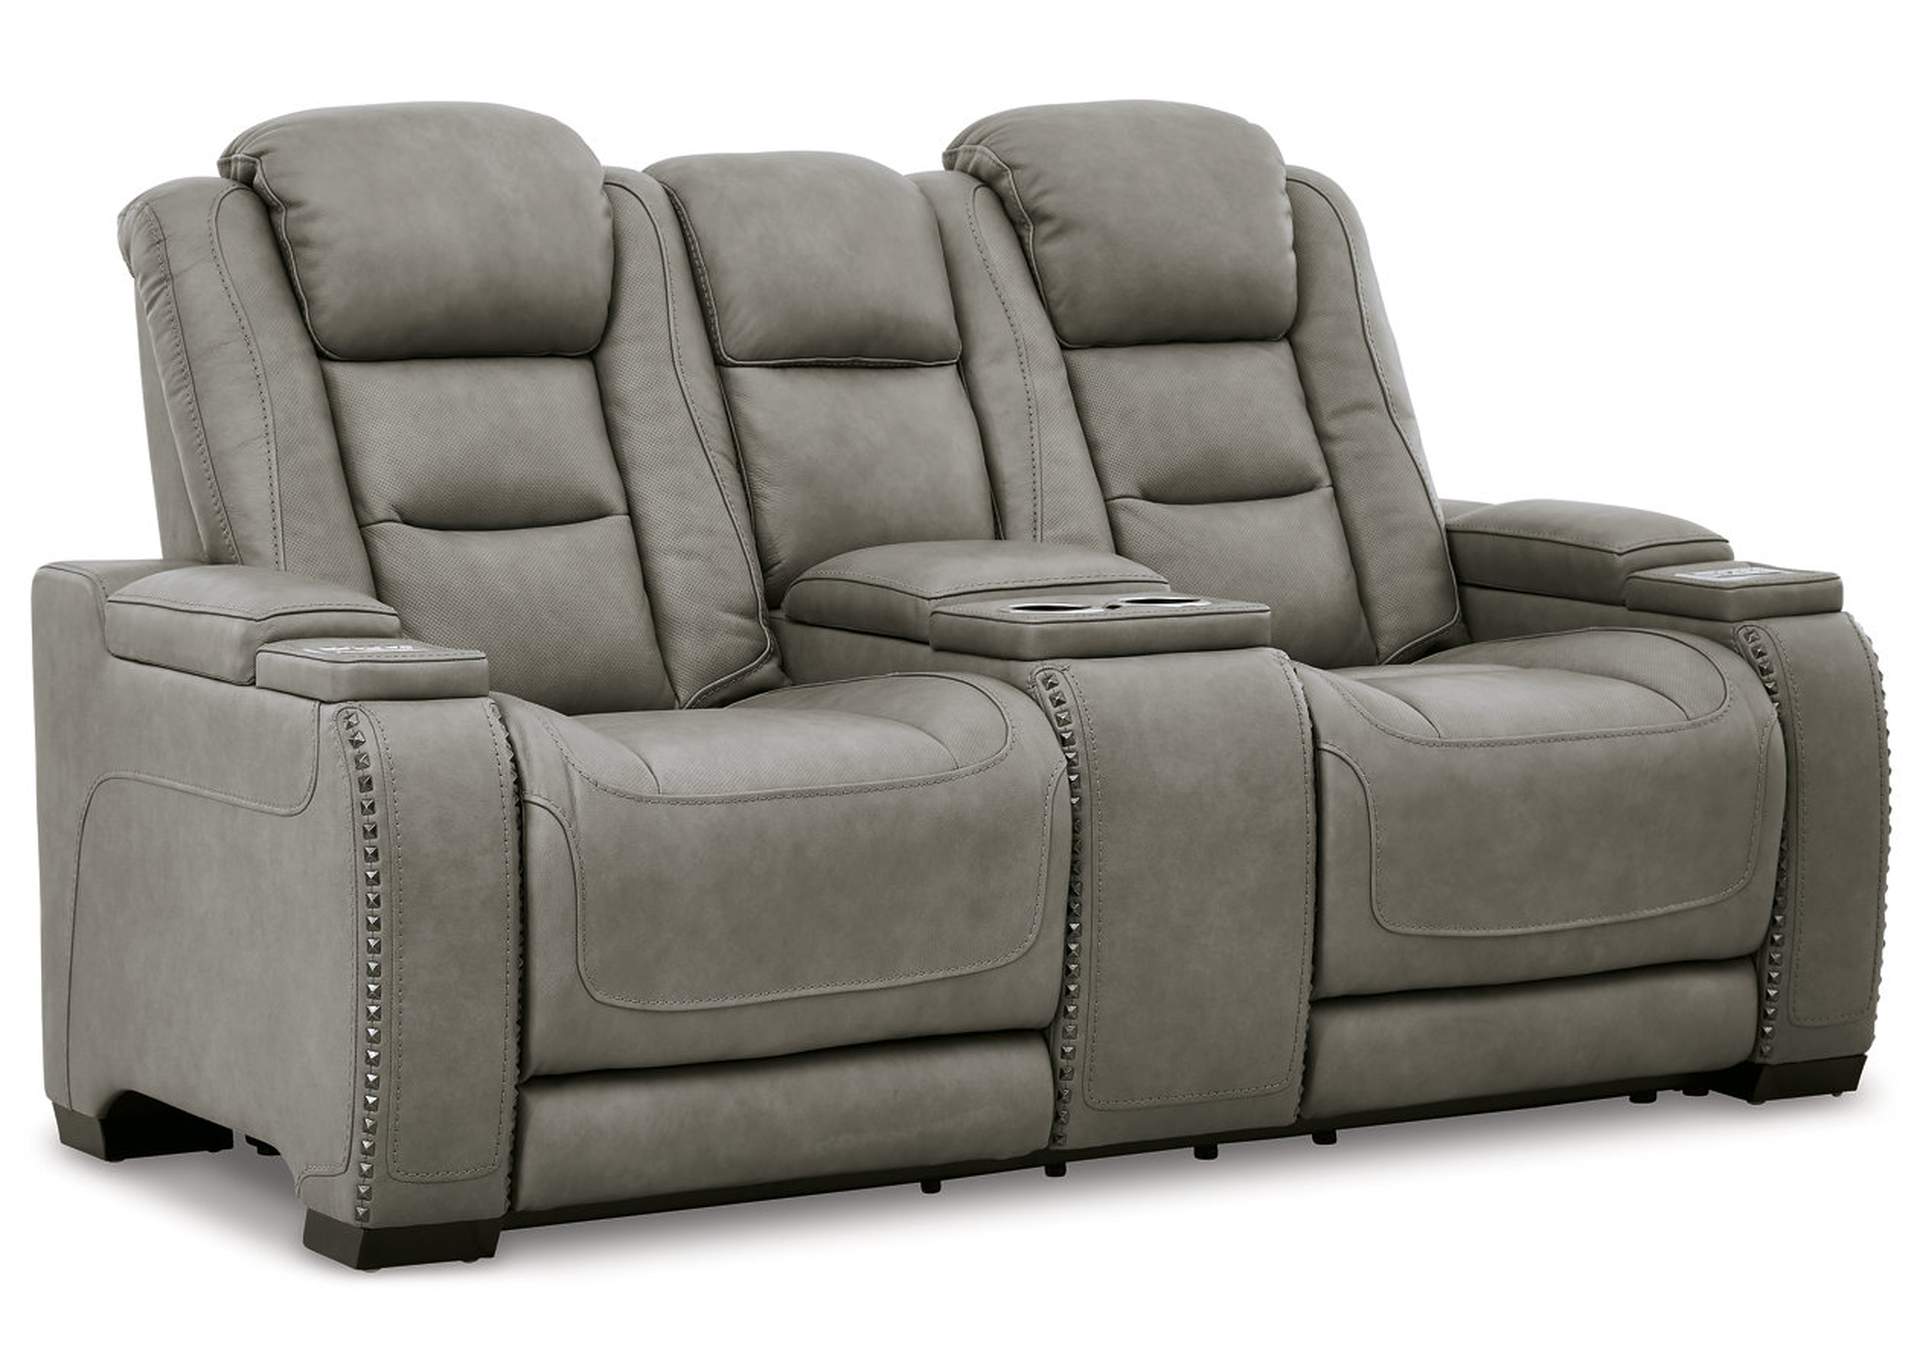 The Man-Den Sofa, Loveseat and Recliner,Signature Design By Ashley